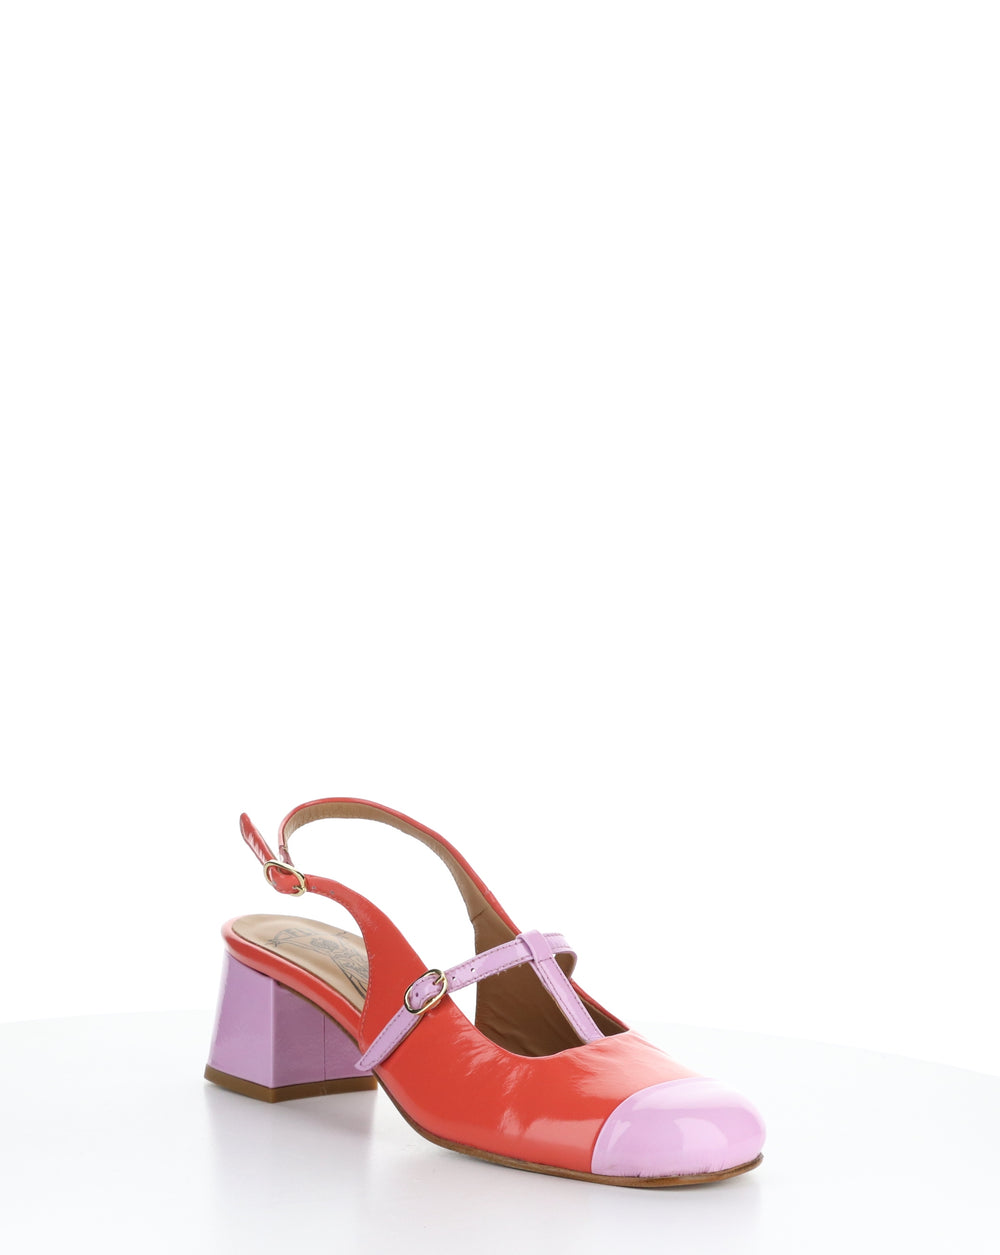 SOLN083FLY 001 PINK/SCARLET Round Toe Shoes